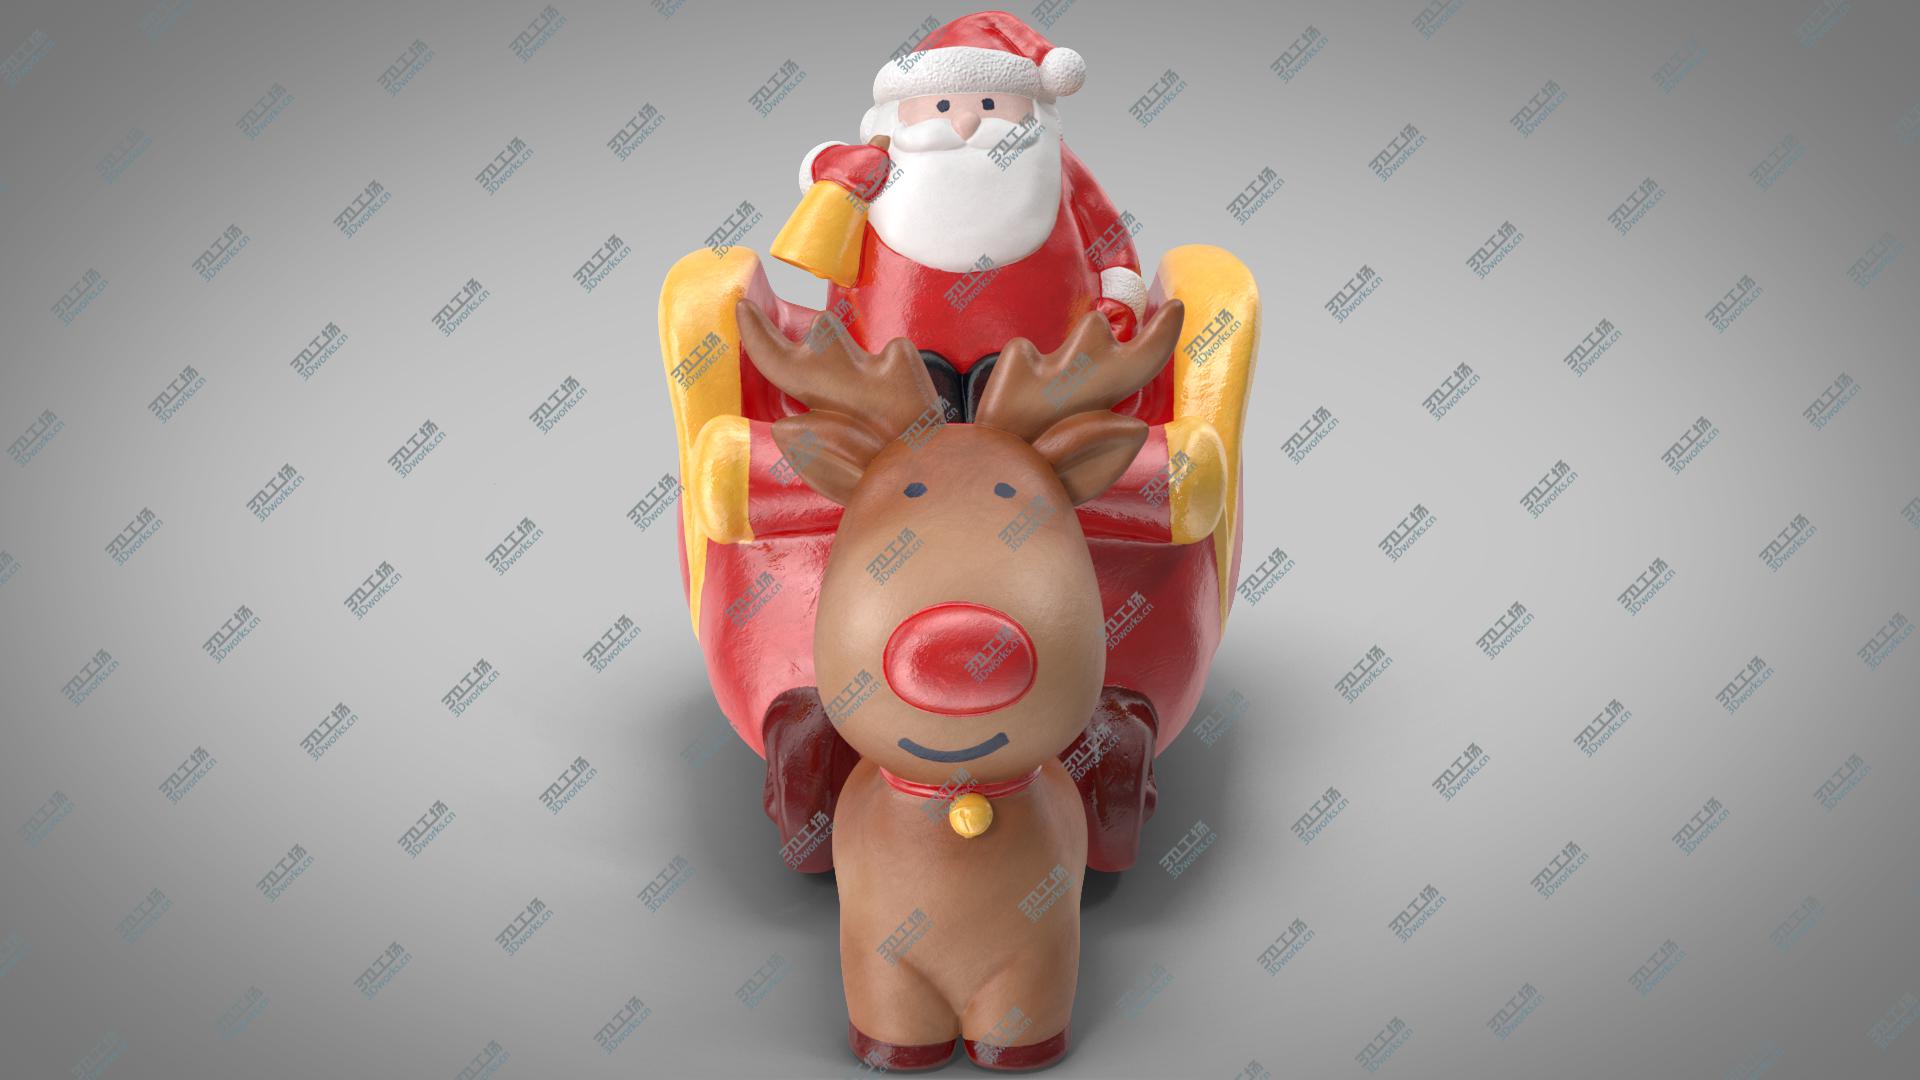 images/goods_img/202105071/3D Santa Claus with Sleigh Decorative Figurine model/2.jpg